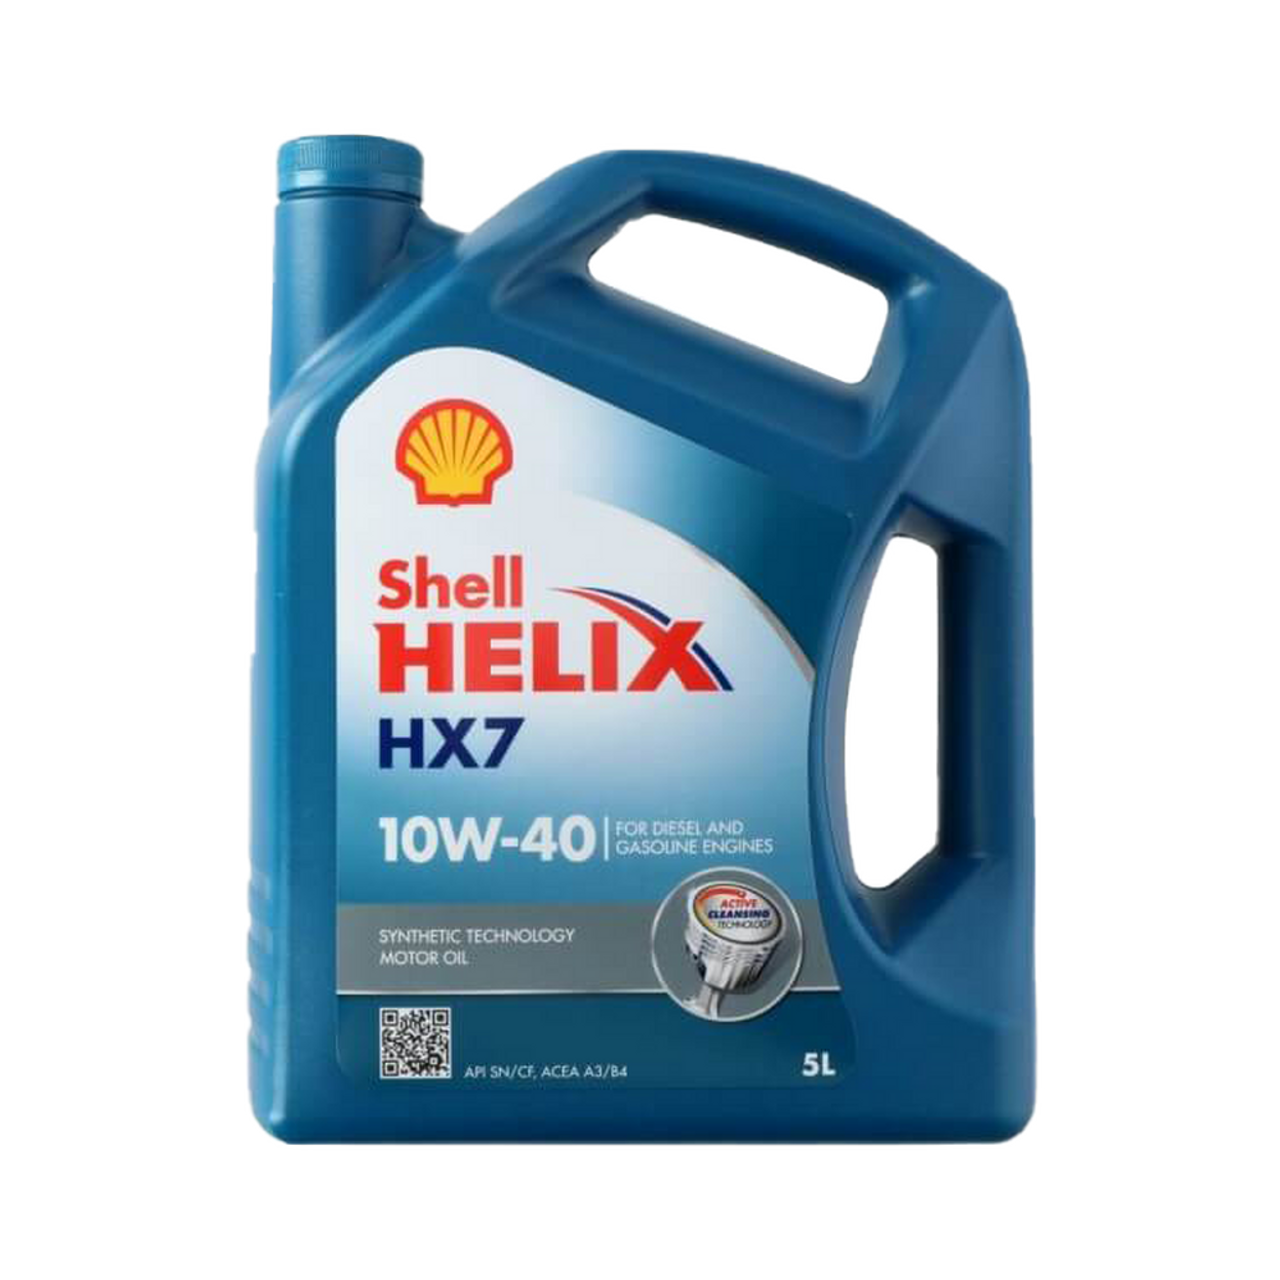 Shell Helix HX7 10W-40 Synthetic Technology Premium Engine Oil 5L